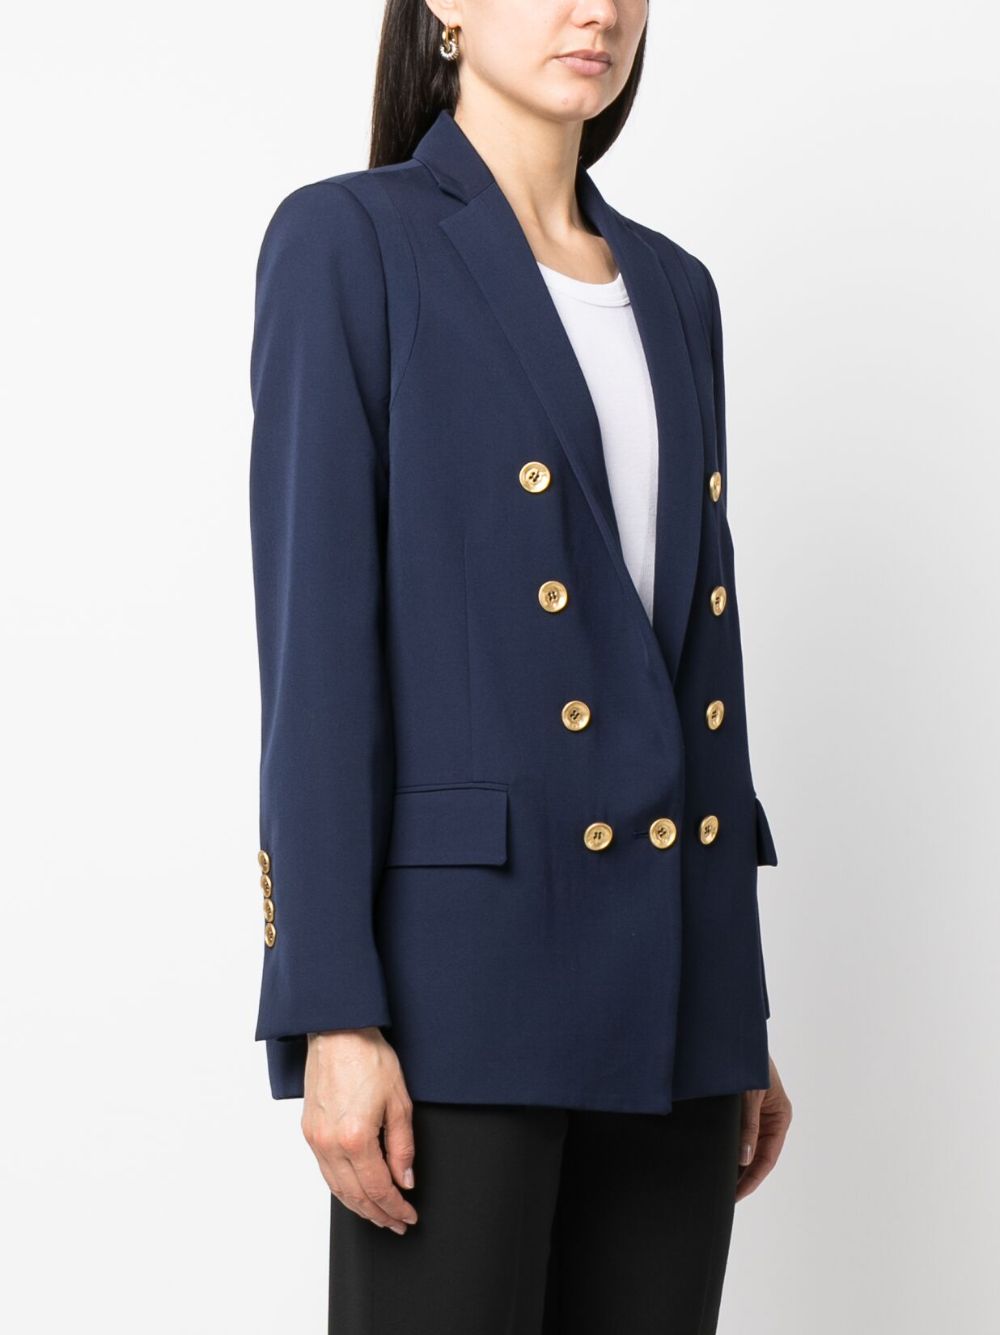 Ports 1961 slit-sleeves double-breasted Blazer - Farfetch